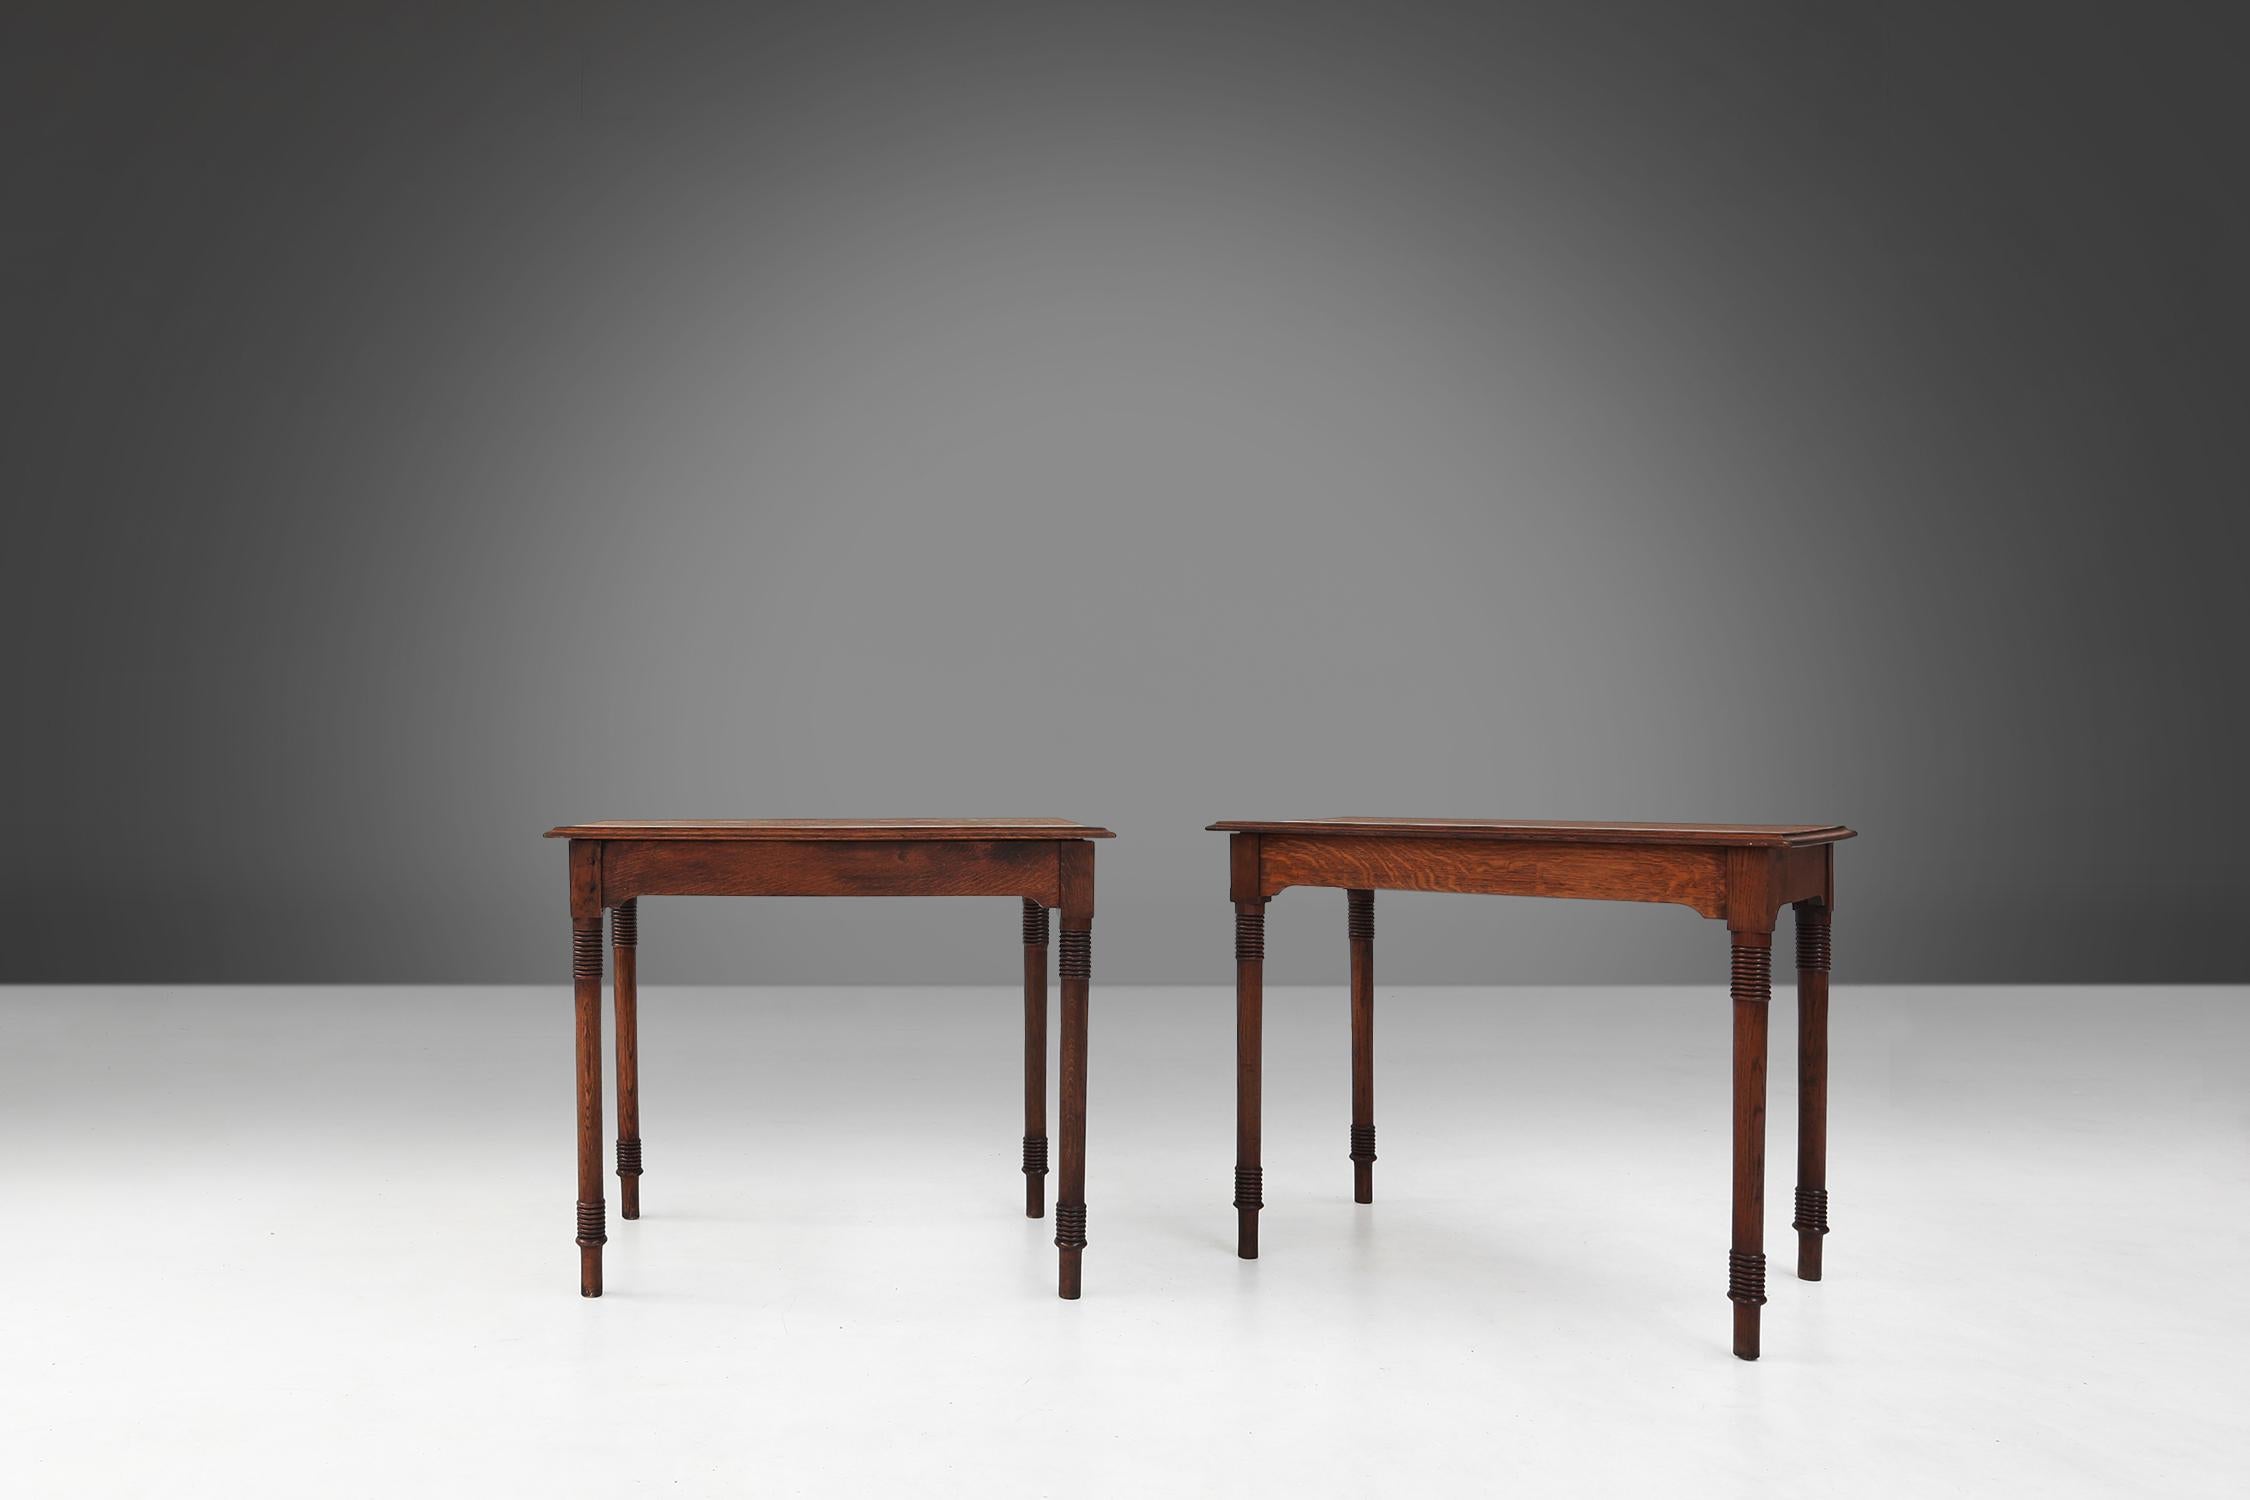 This beautiful set of two rectangular tables. They are made of wood and the most striking thing about these tables are the beautiful details in the legs, which are typical of the art deco style. The legs have a decoratived shape and are decorated